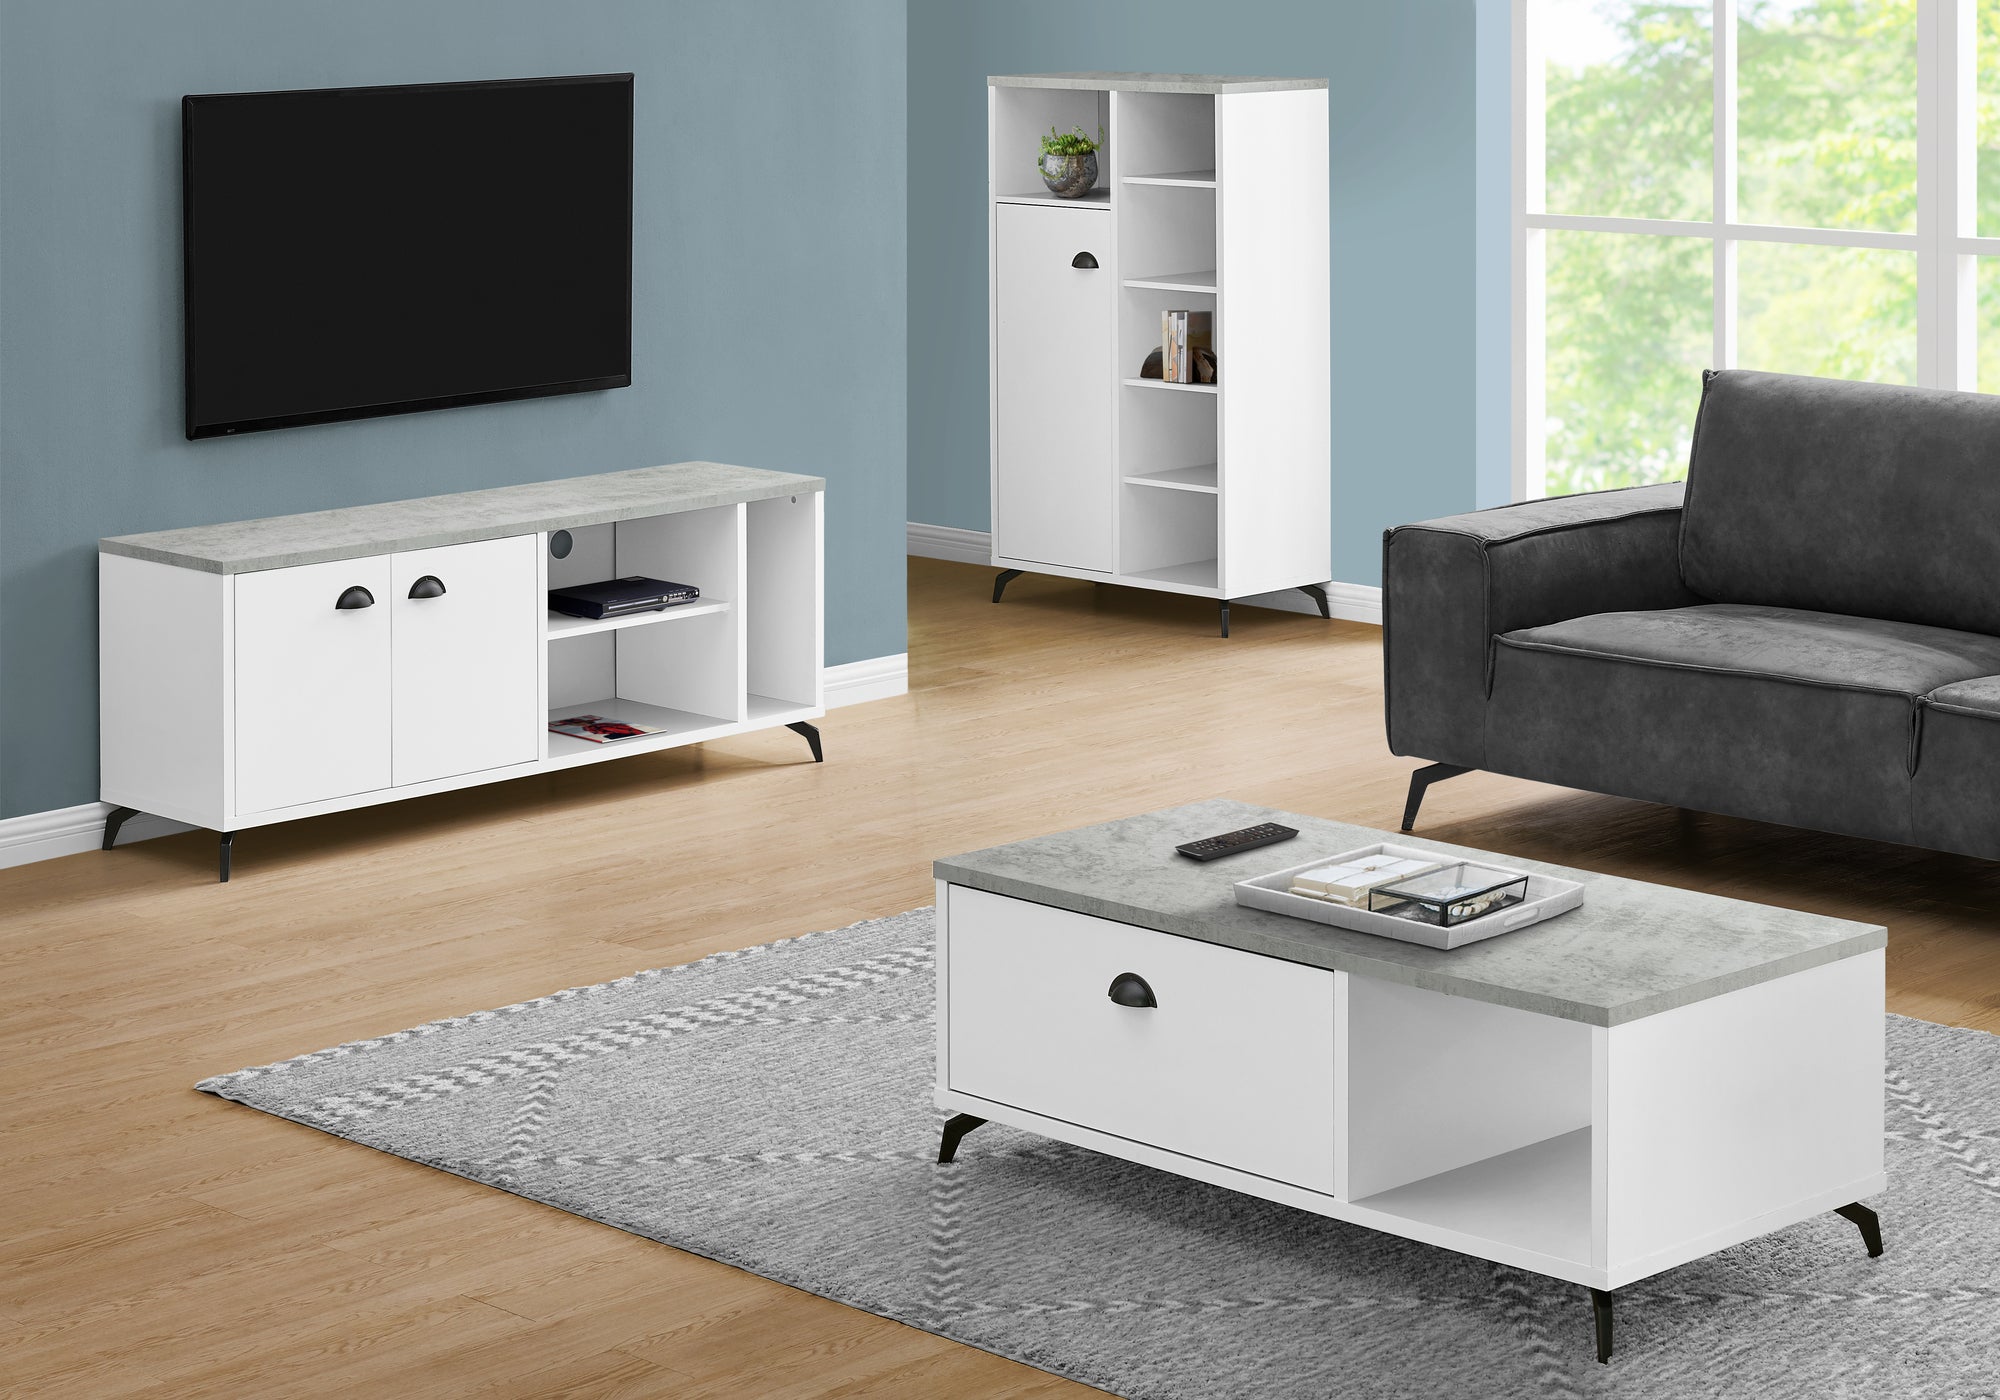 MN-542841    Tv Stand, 60 Inch, Console, Media Entertainment Center, Storage Cabinet, Living Room, Bedroom, Laminate, Metal, Grey Cement Look, Contemporary, Modern